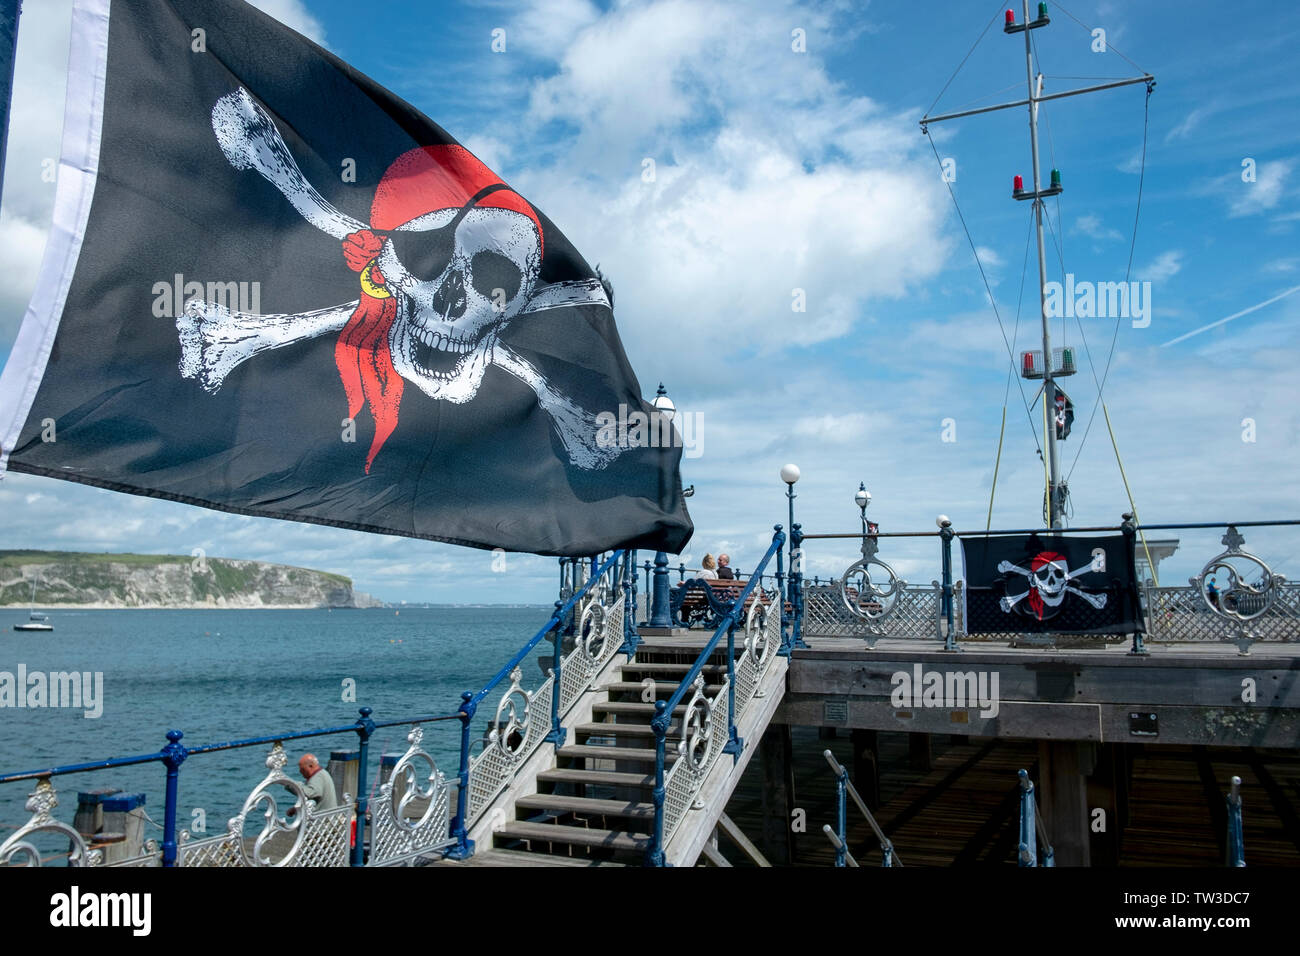 A skull and crossbones pirate flag flies on Swanage Pier, Dorset, UK Stock Photo